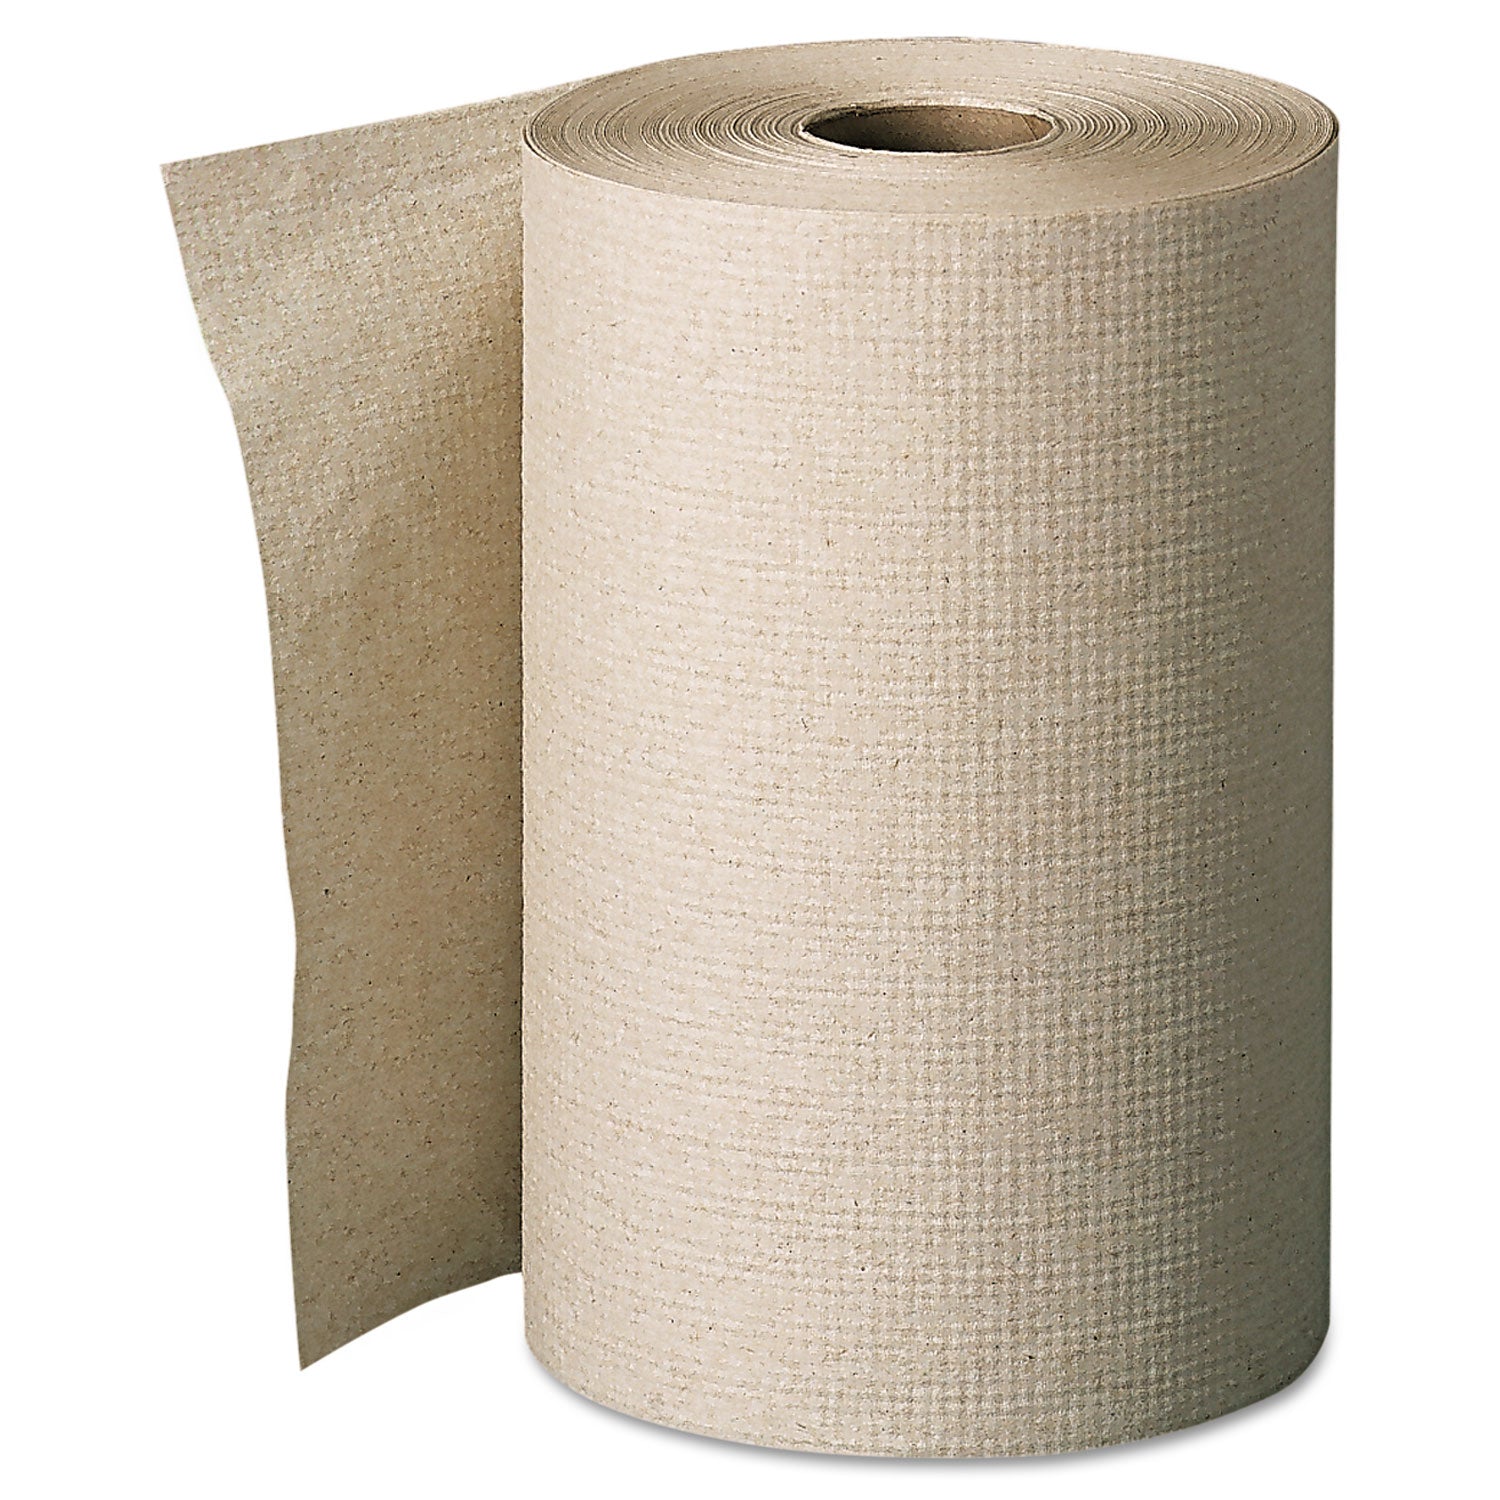 Pacific Blue Basic Nonperforated Paper Towels, 1-Ply, 7.88 x 350 ft, Brown, 12 Rolls/Carton - 